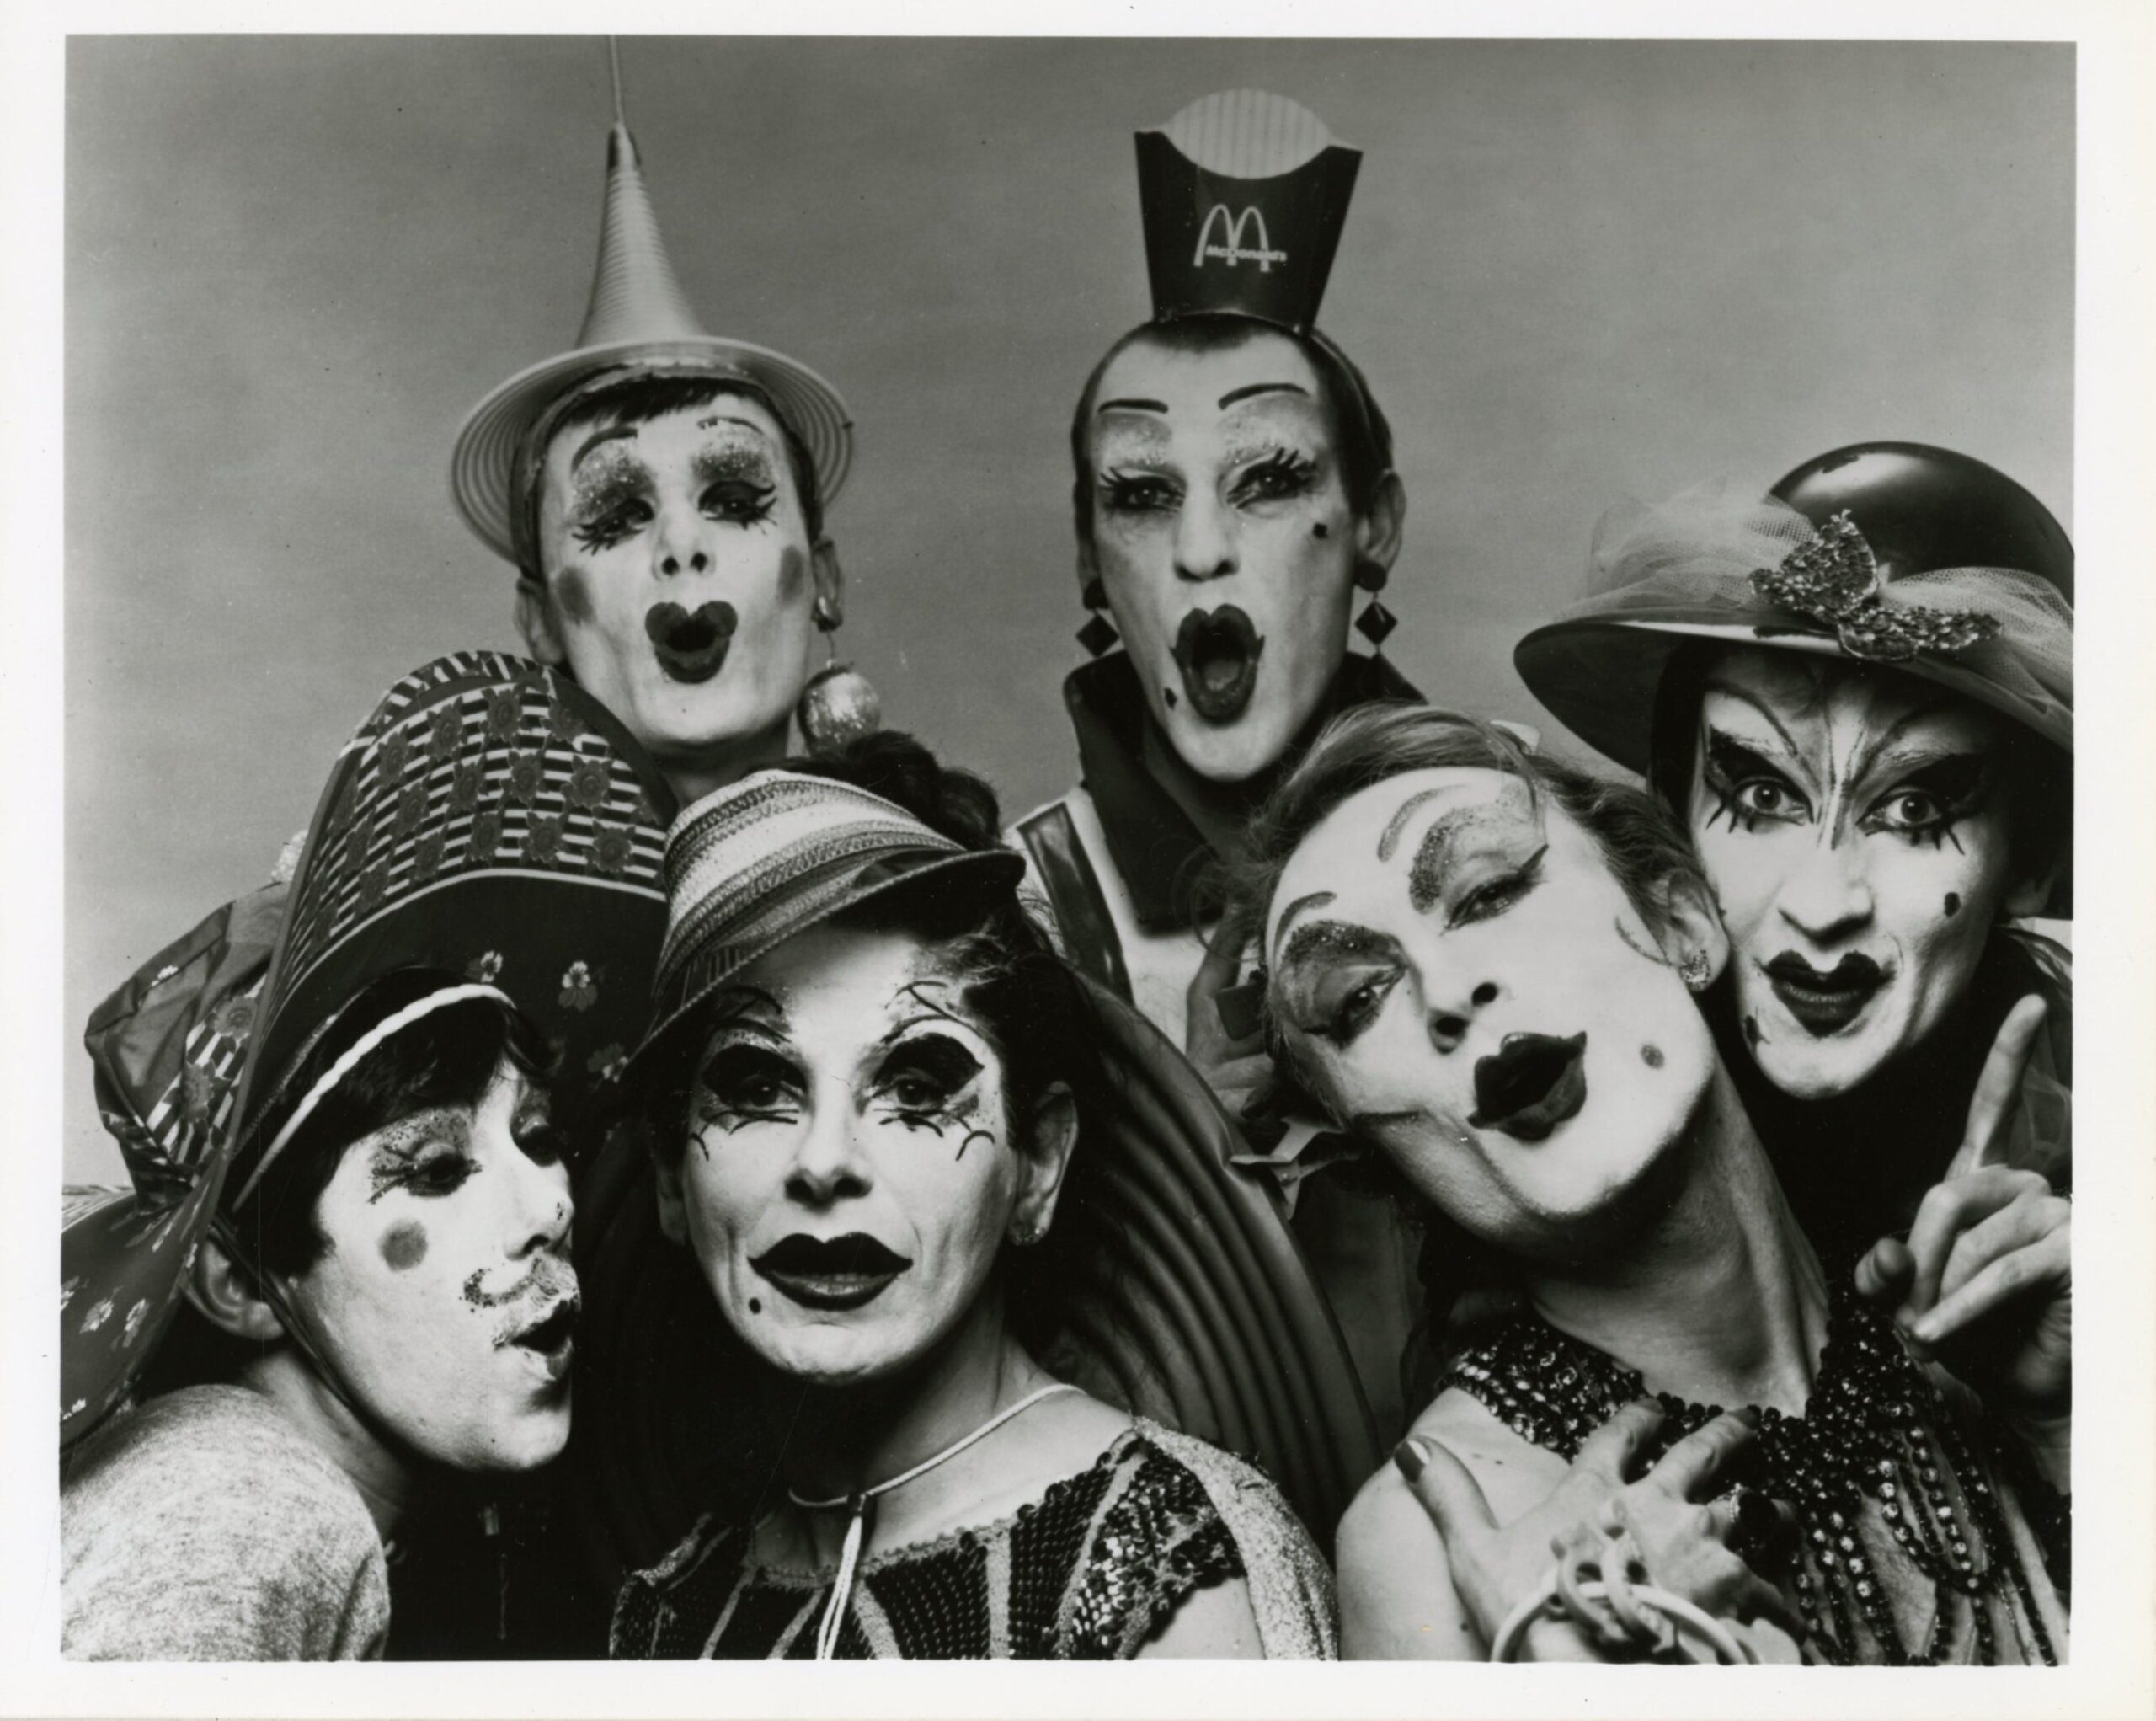 Black and white photo of six drag queens in old timey make-up; most wear hats, one has a McDonald's fry container on her head